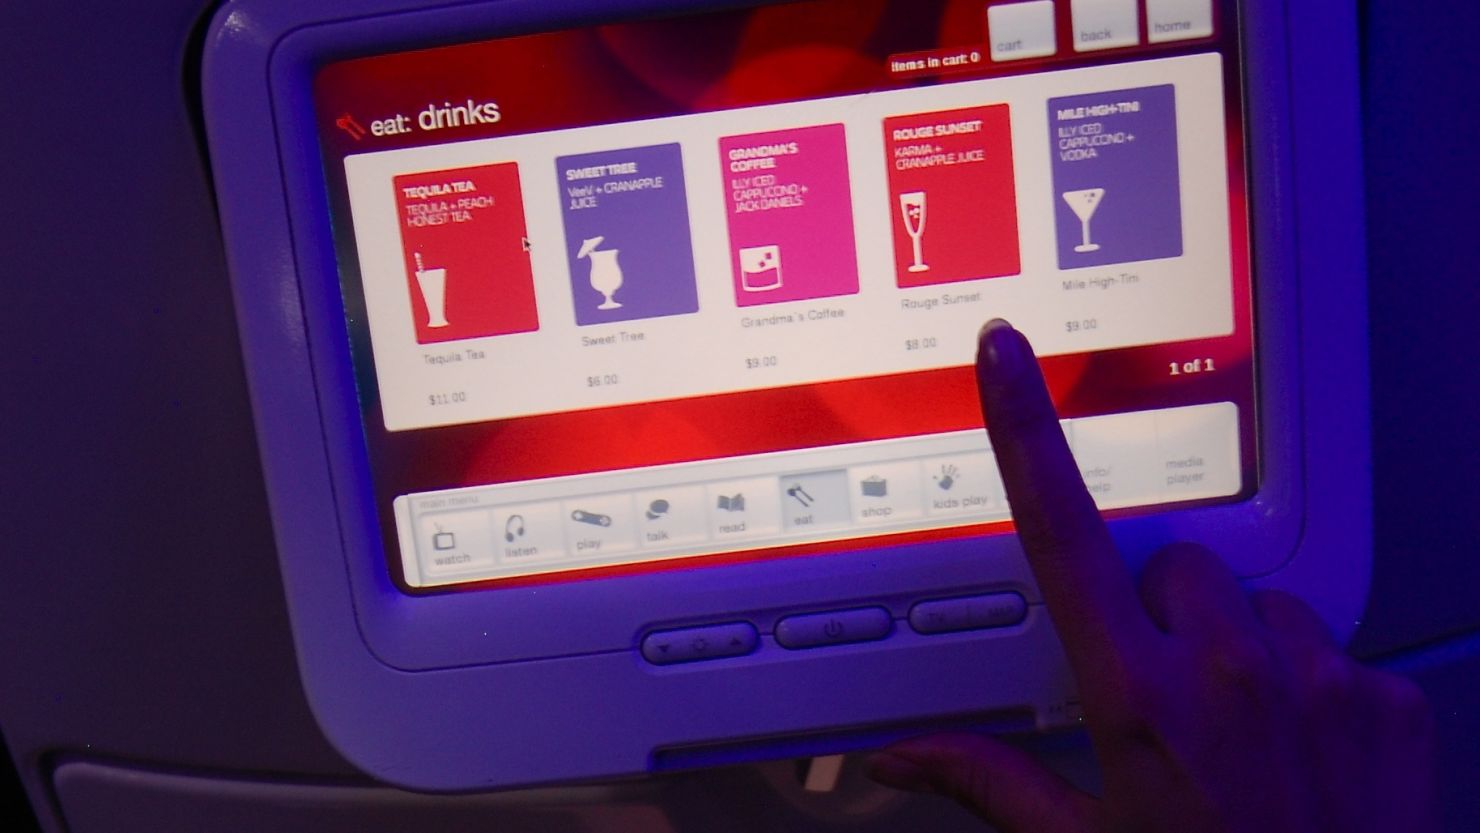 Virgin Atlantic offers touchscreen ordering for snacks to expedite the arrival of in-flight sustenance.